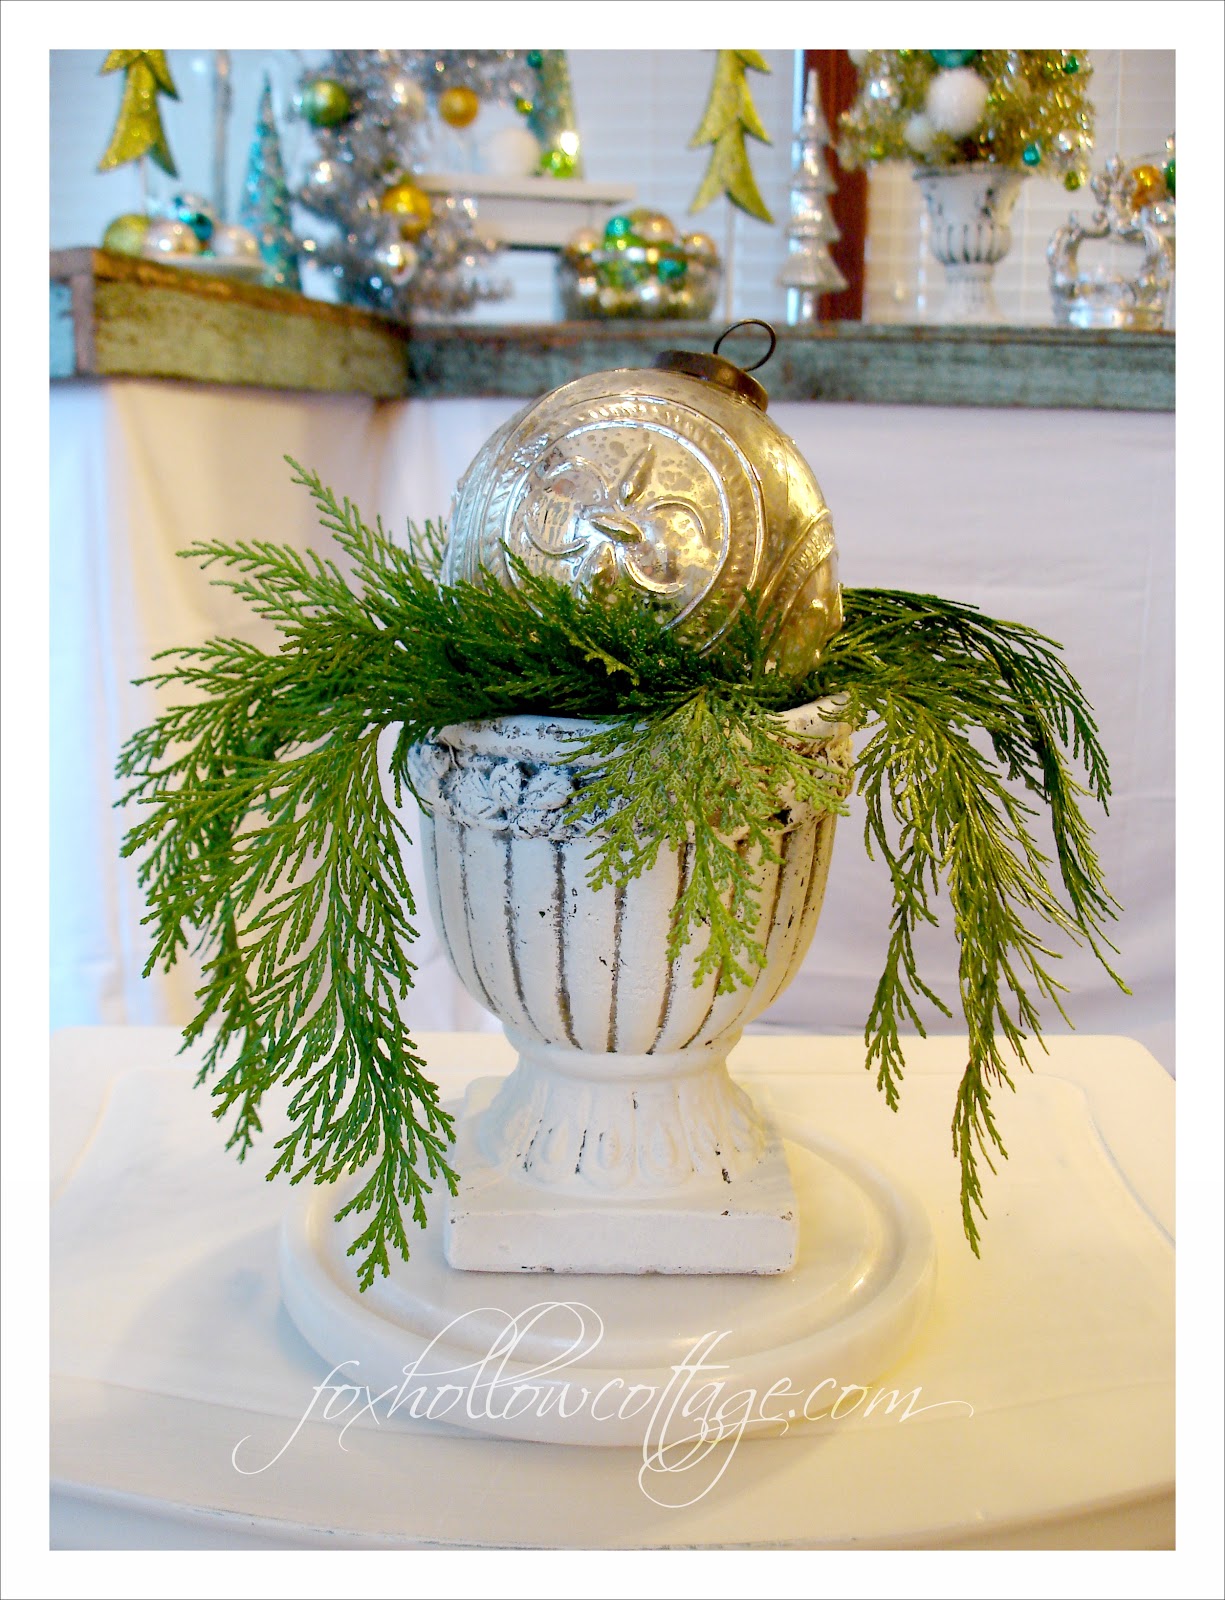 Decorating With Urns Christmas Edition  Fox Hollow Cottage